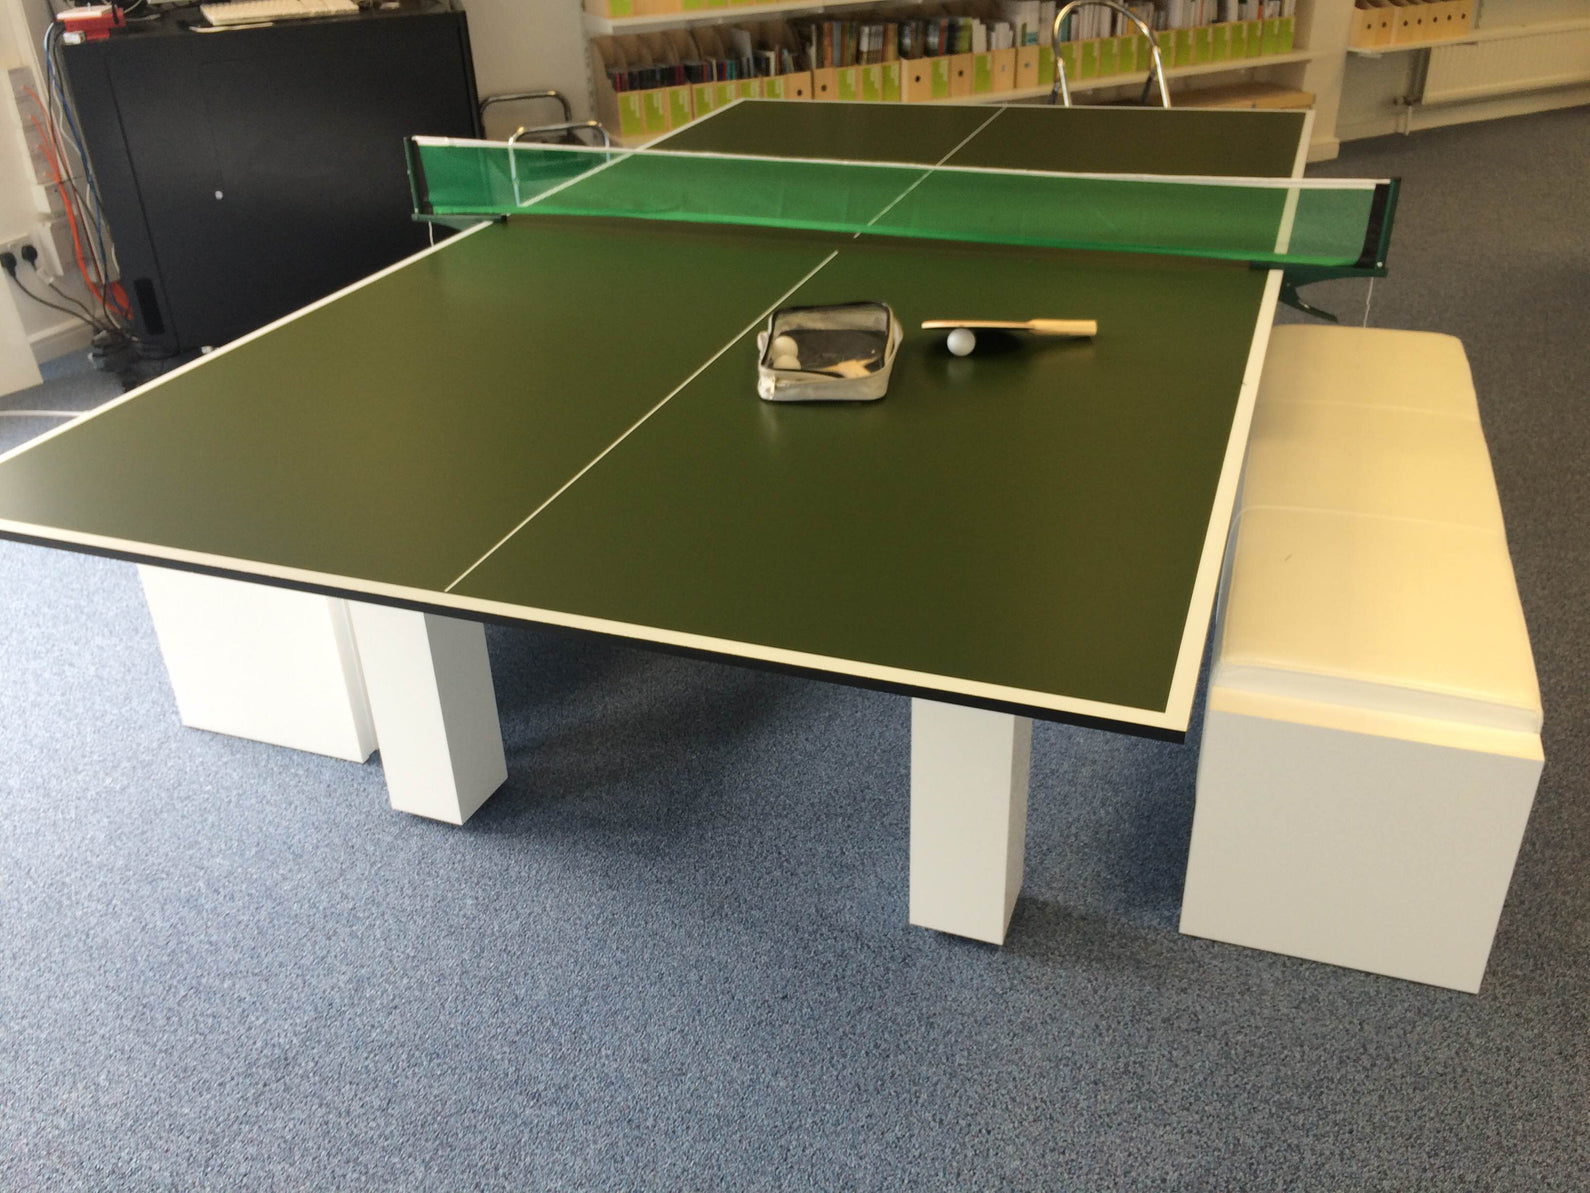 9' x 5' Tournament Standard Size Table Tennis Tops for Your Table!